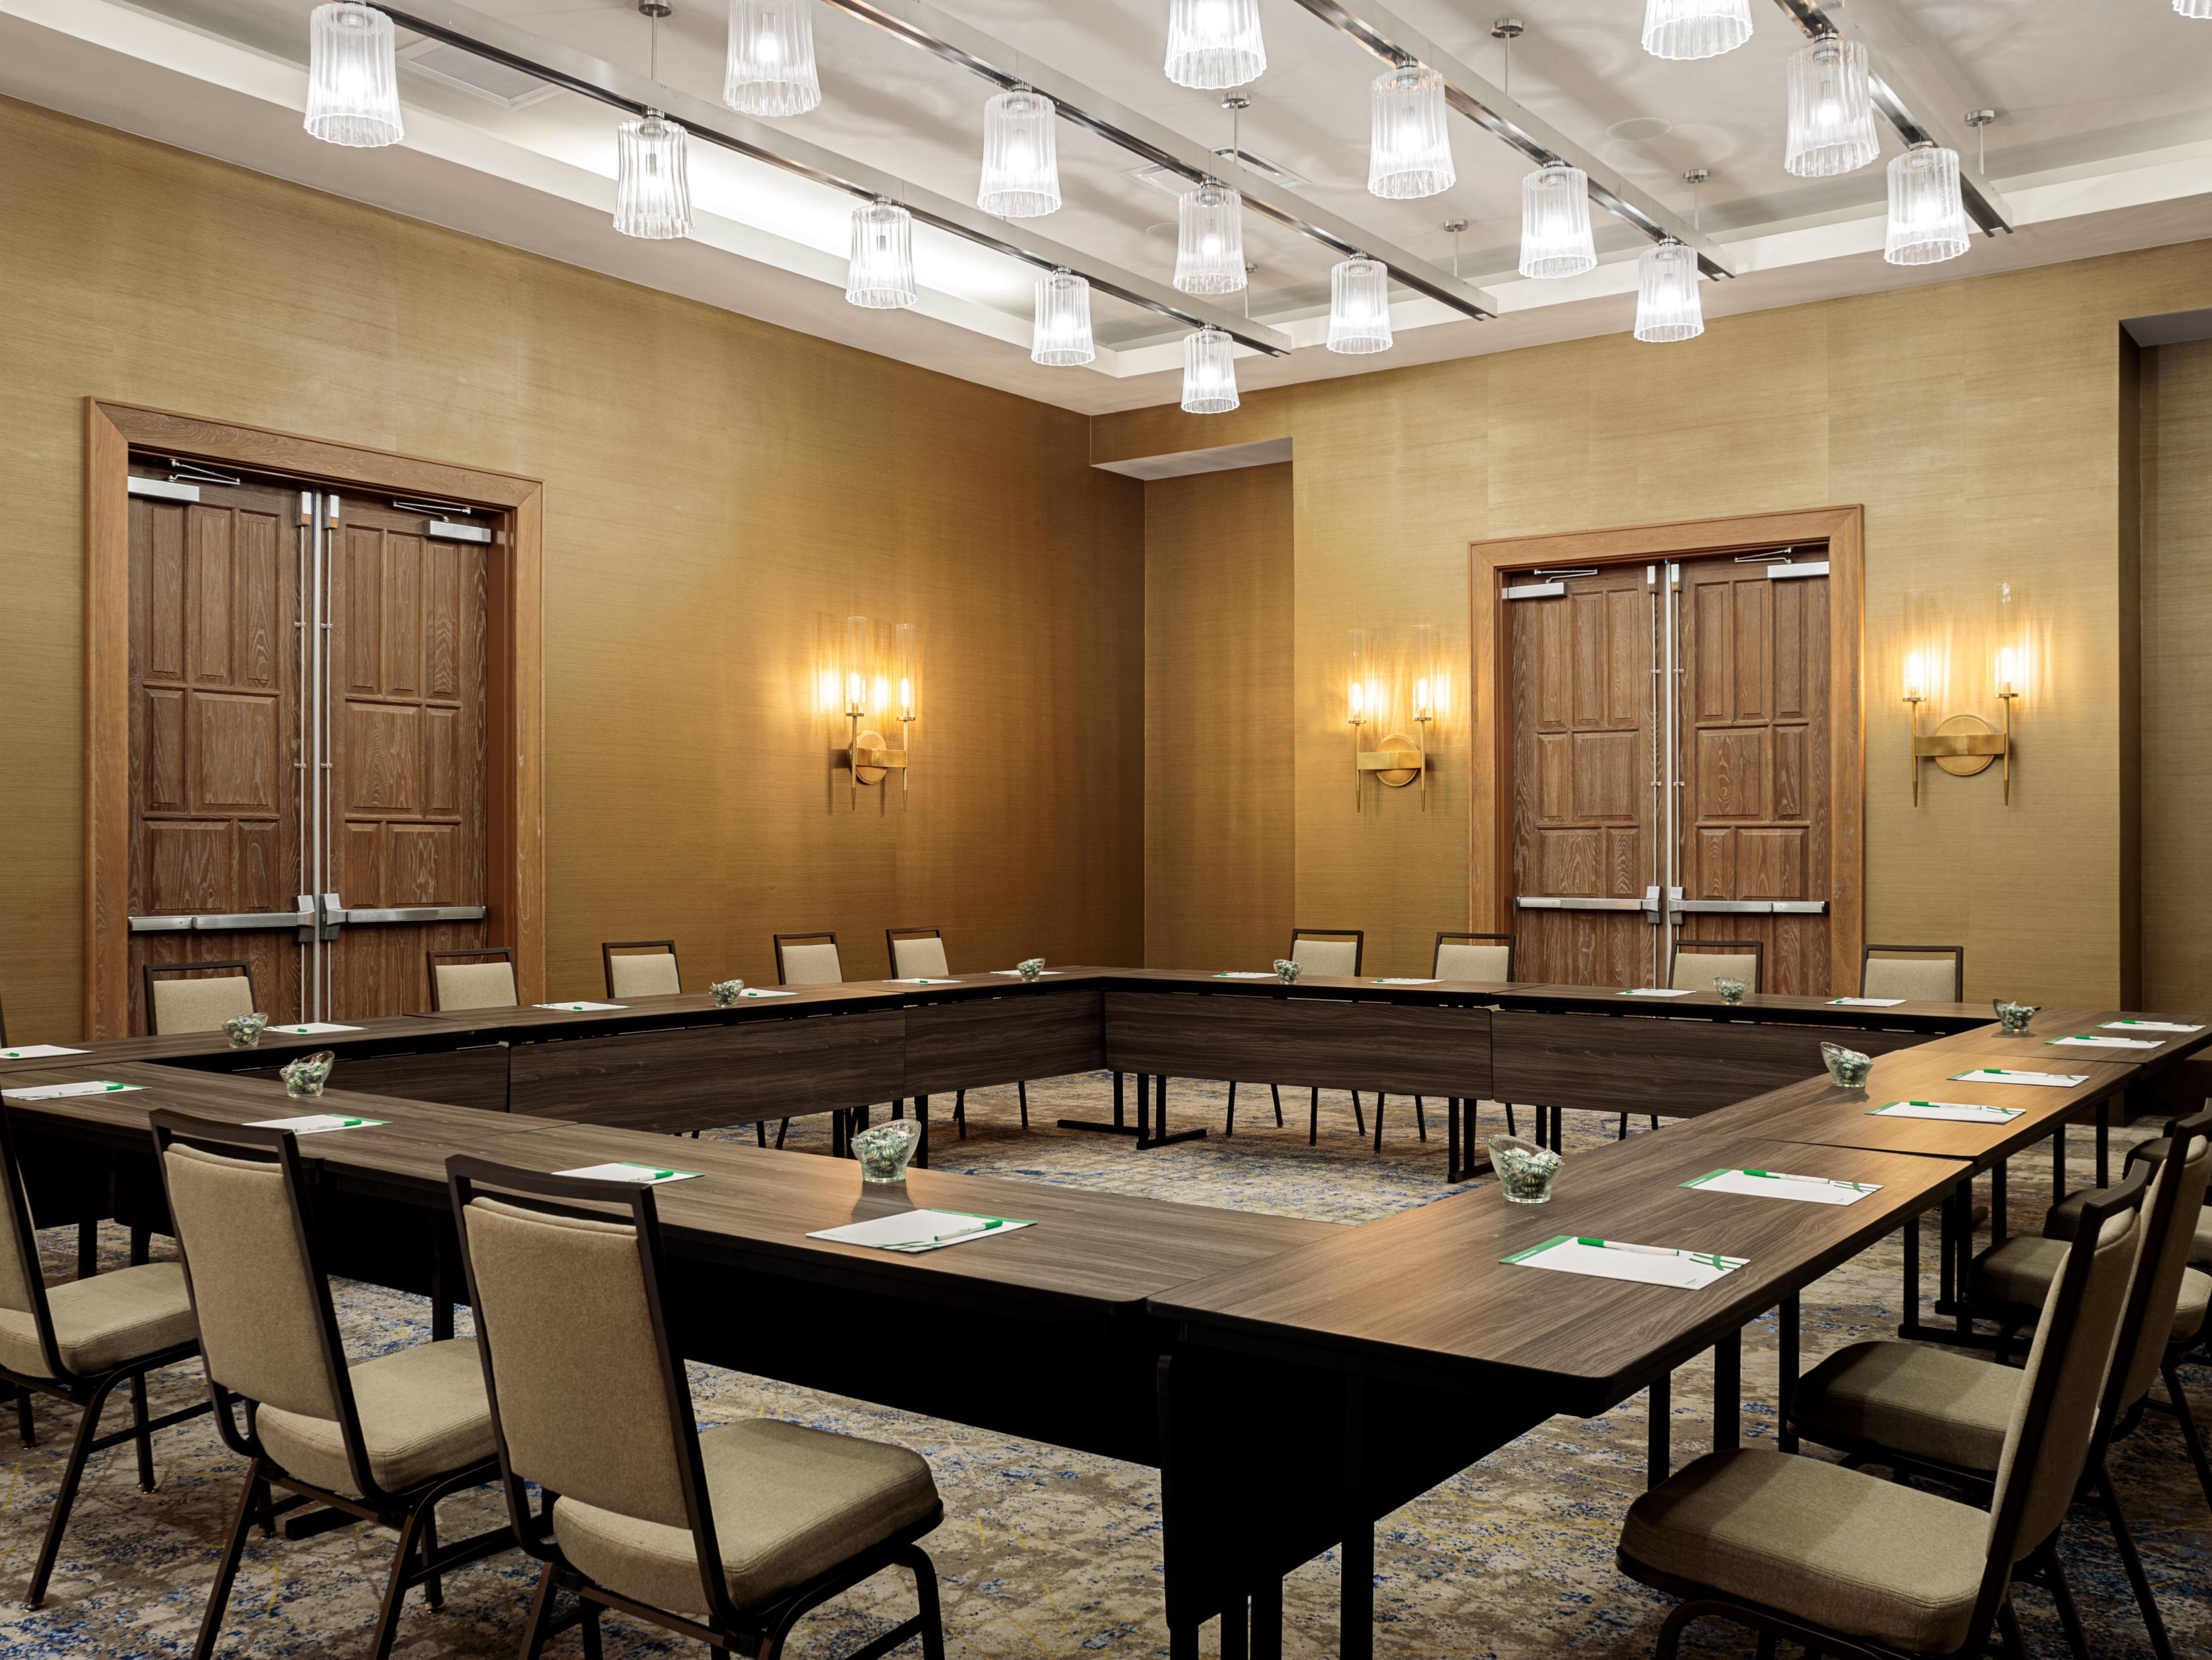 Make your meetings a success in our event spaces, conveniently located in downtown Nashville. Give dynamic presentations with audiovisual equipment available in our venues, and keep attendees refreshed with our onsite catering options.